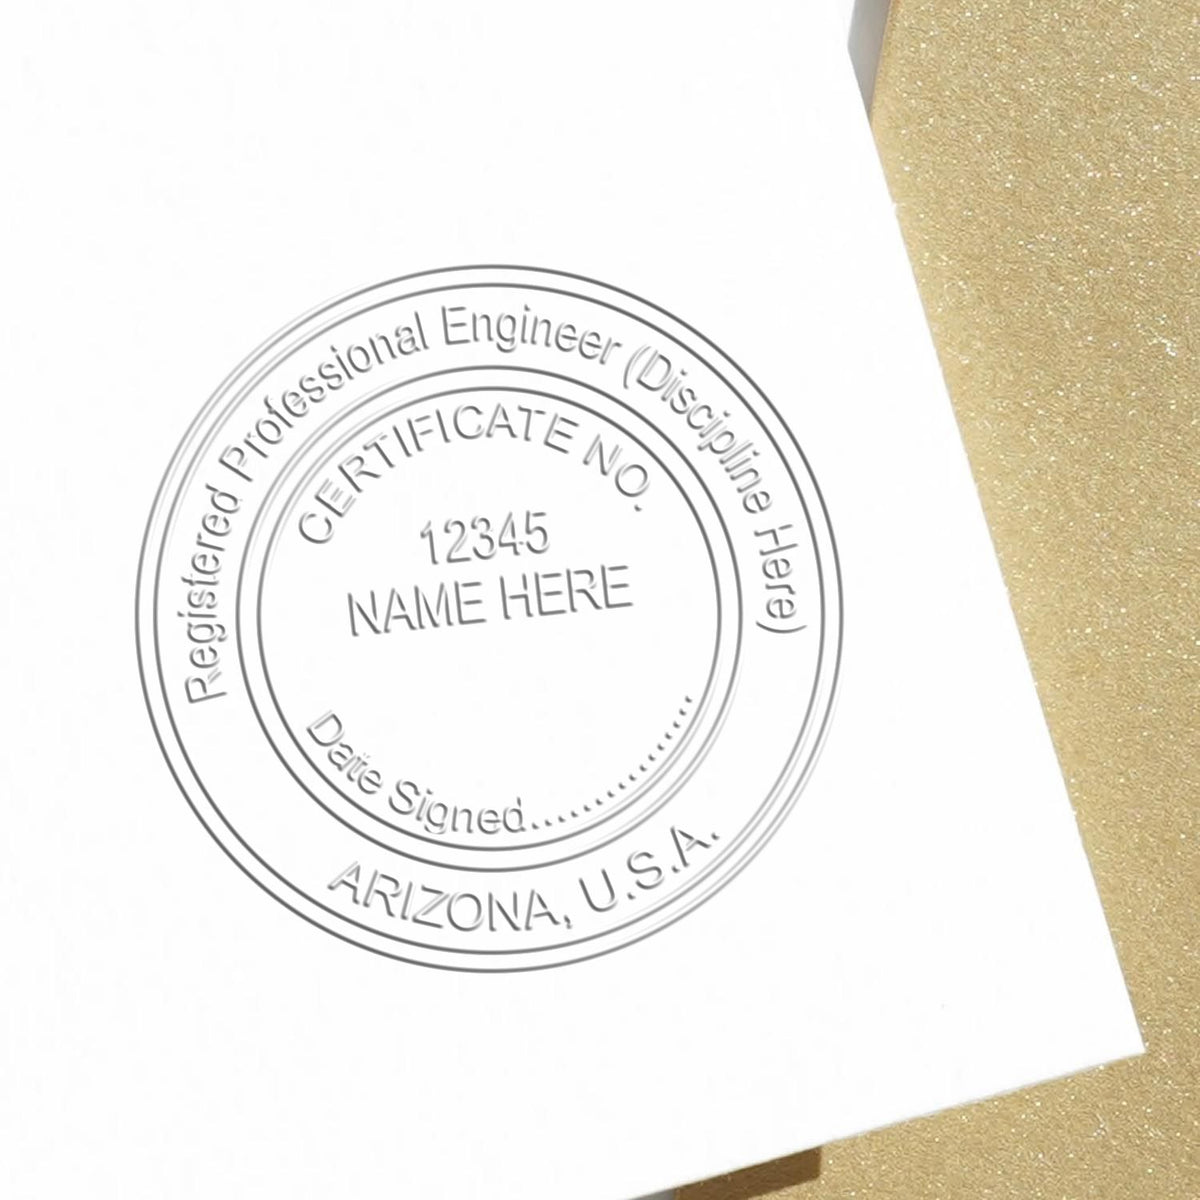 A photograph of the Long Reach Arizona PE Seal stamp impression reveals a vivid, professional image of the on paper.